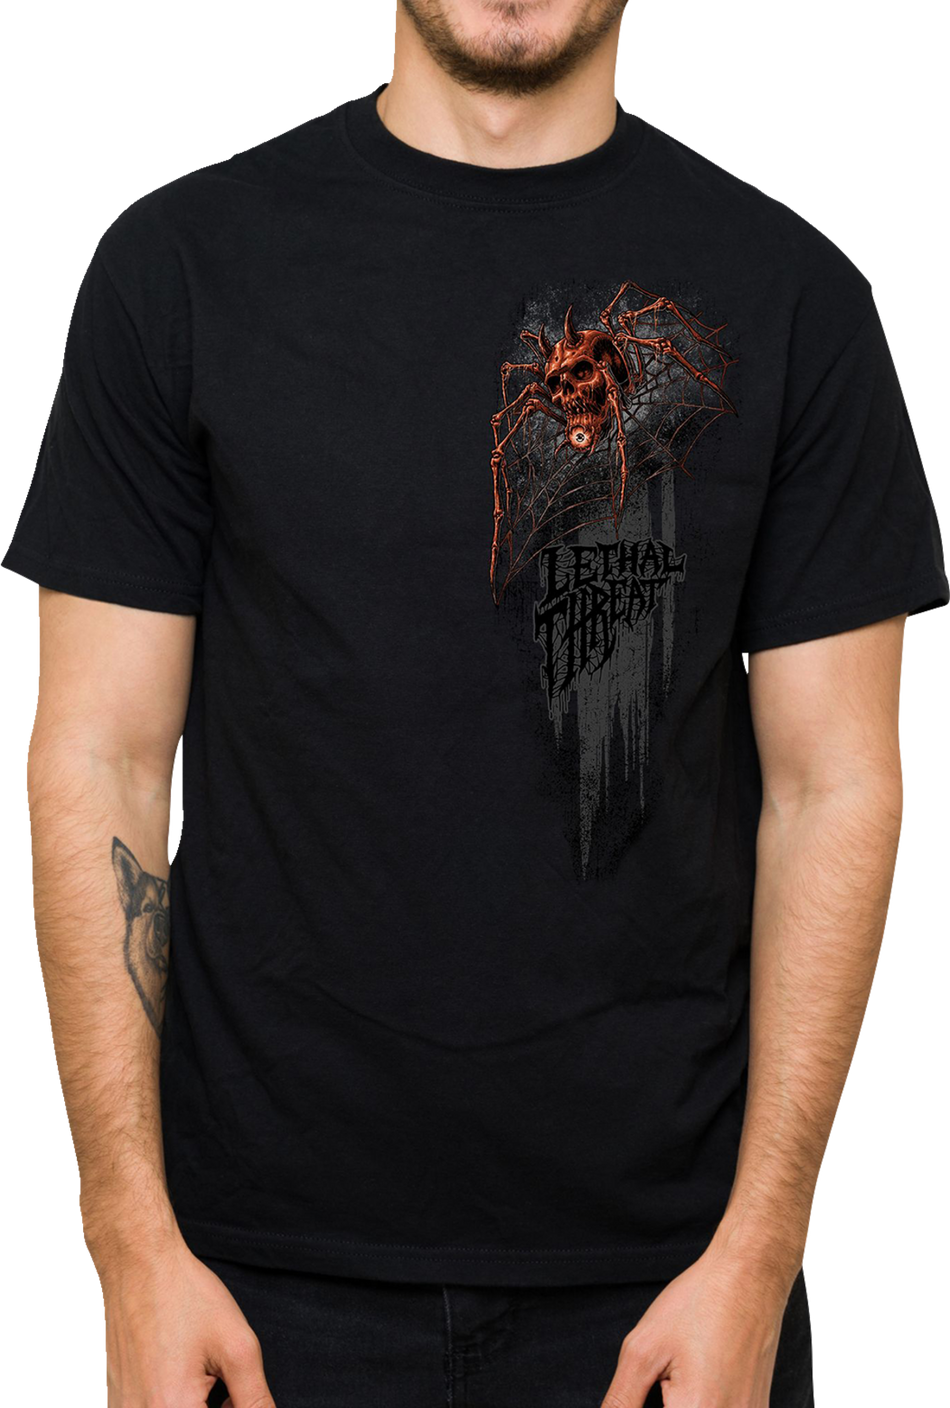 LETHAL THREAT Know Your Darkness T-Shirt - Black - 5XL LT20902-5XL